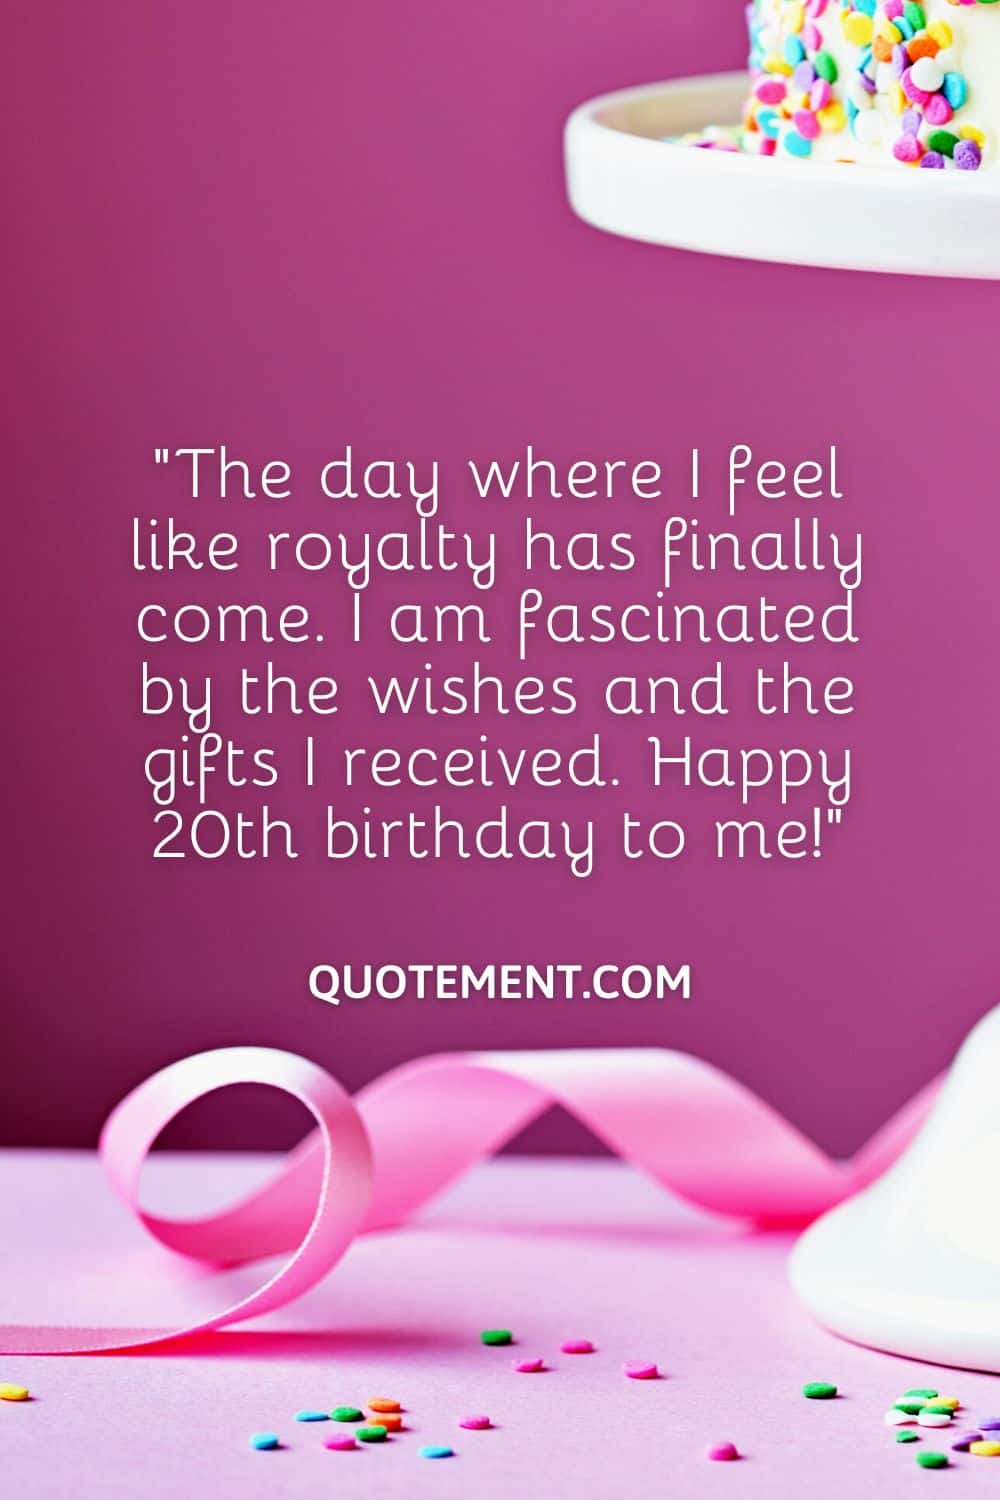 I am fascinated by the wishes and the gifts I received